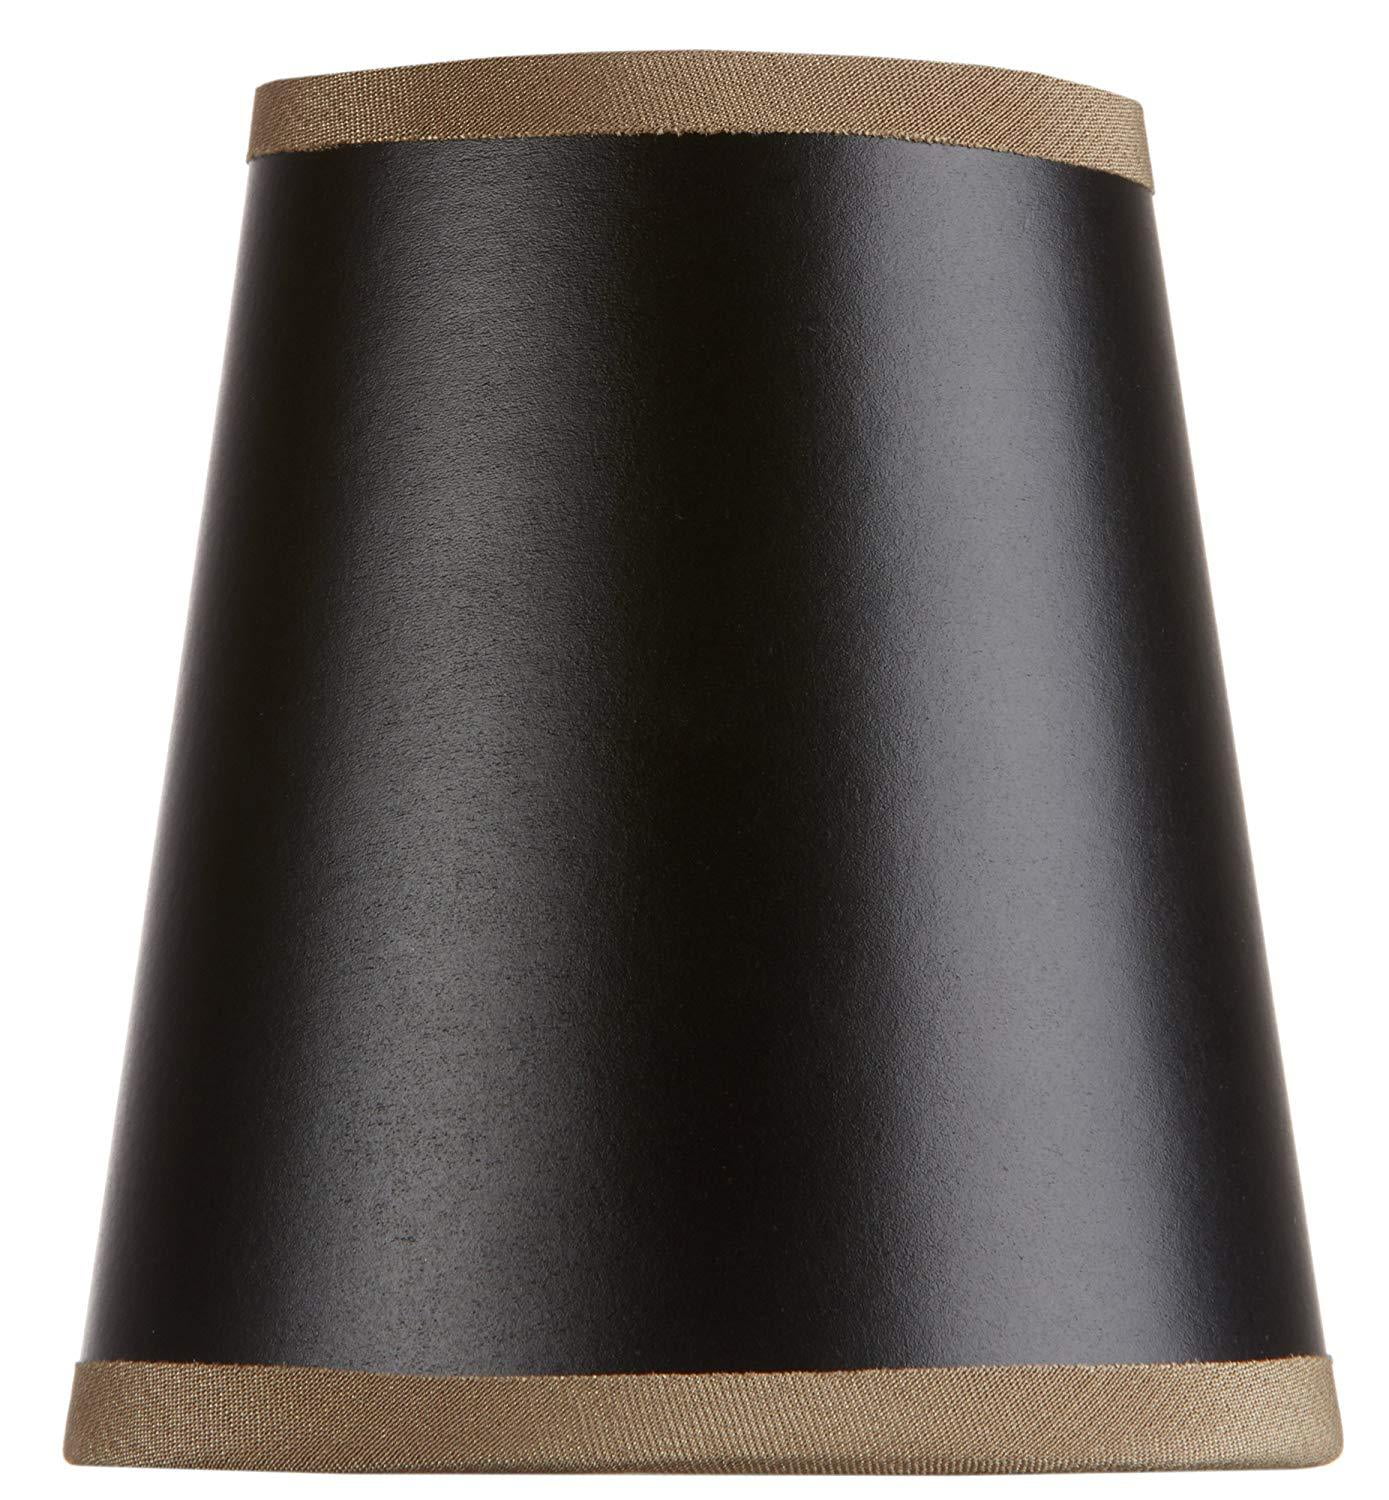 Black 4" Faux Leather Lamp Shade w/ Gold Foil patterned Liner Chandelier Clip On 